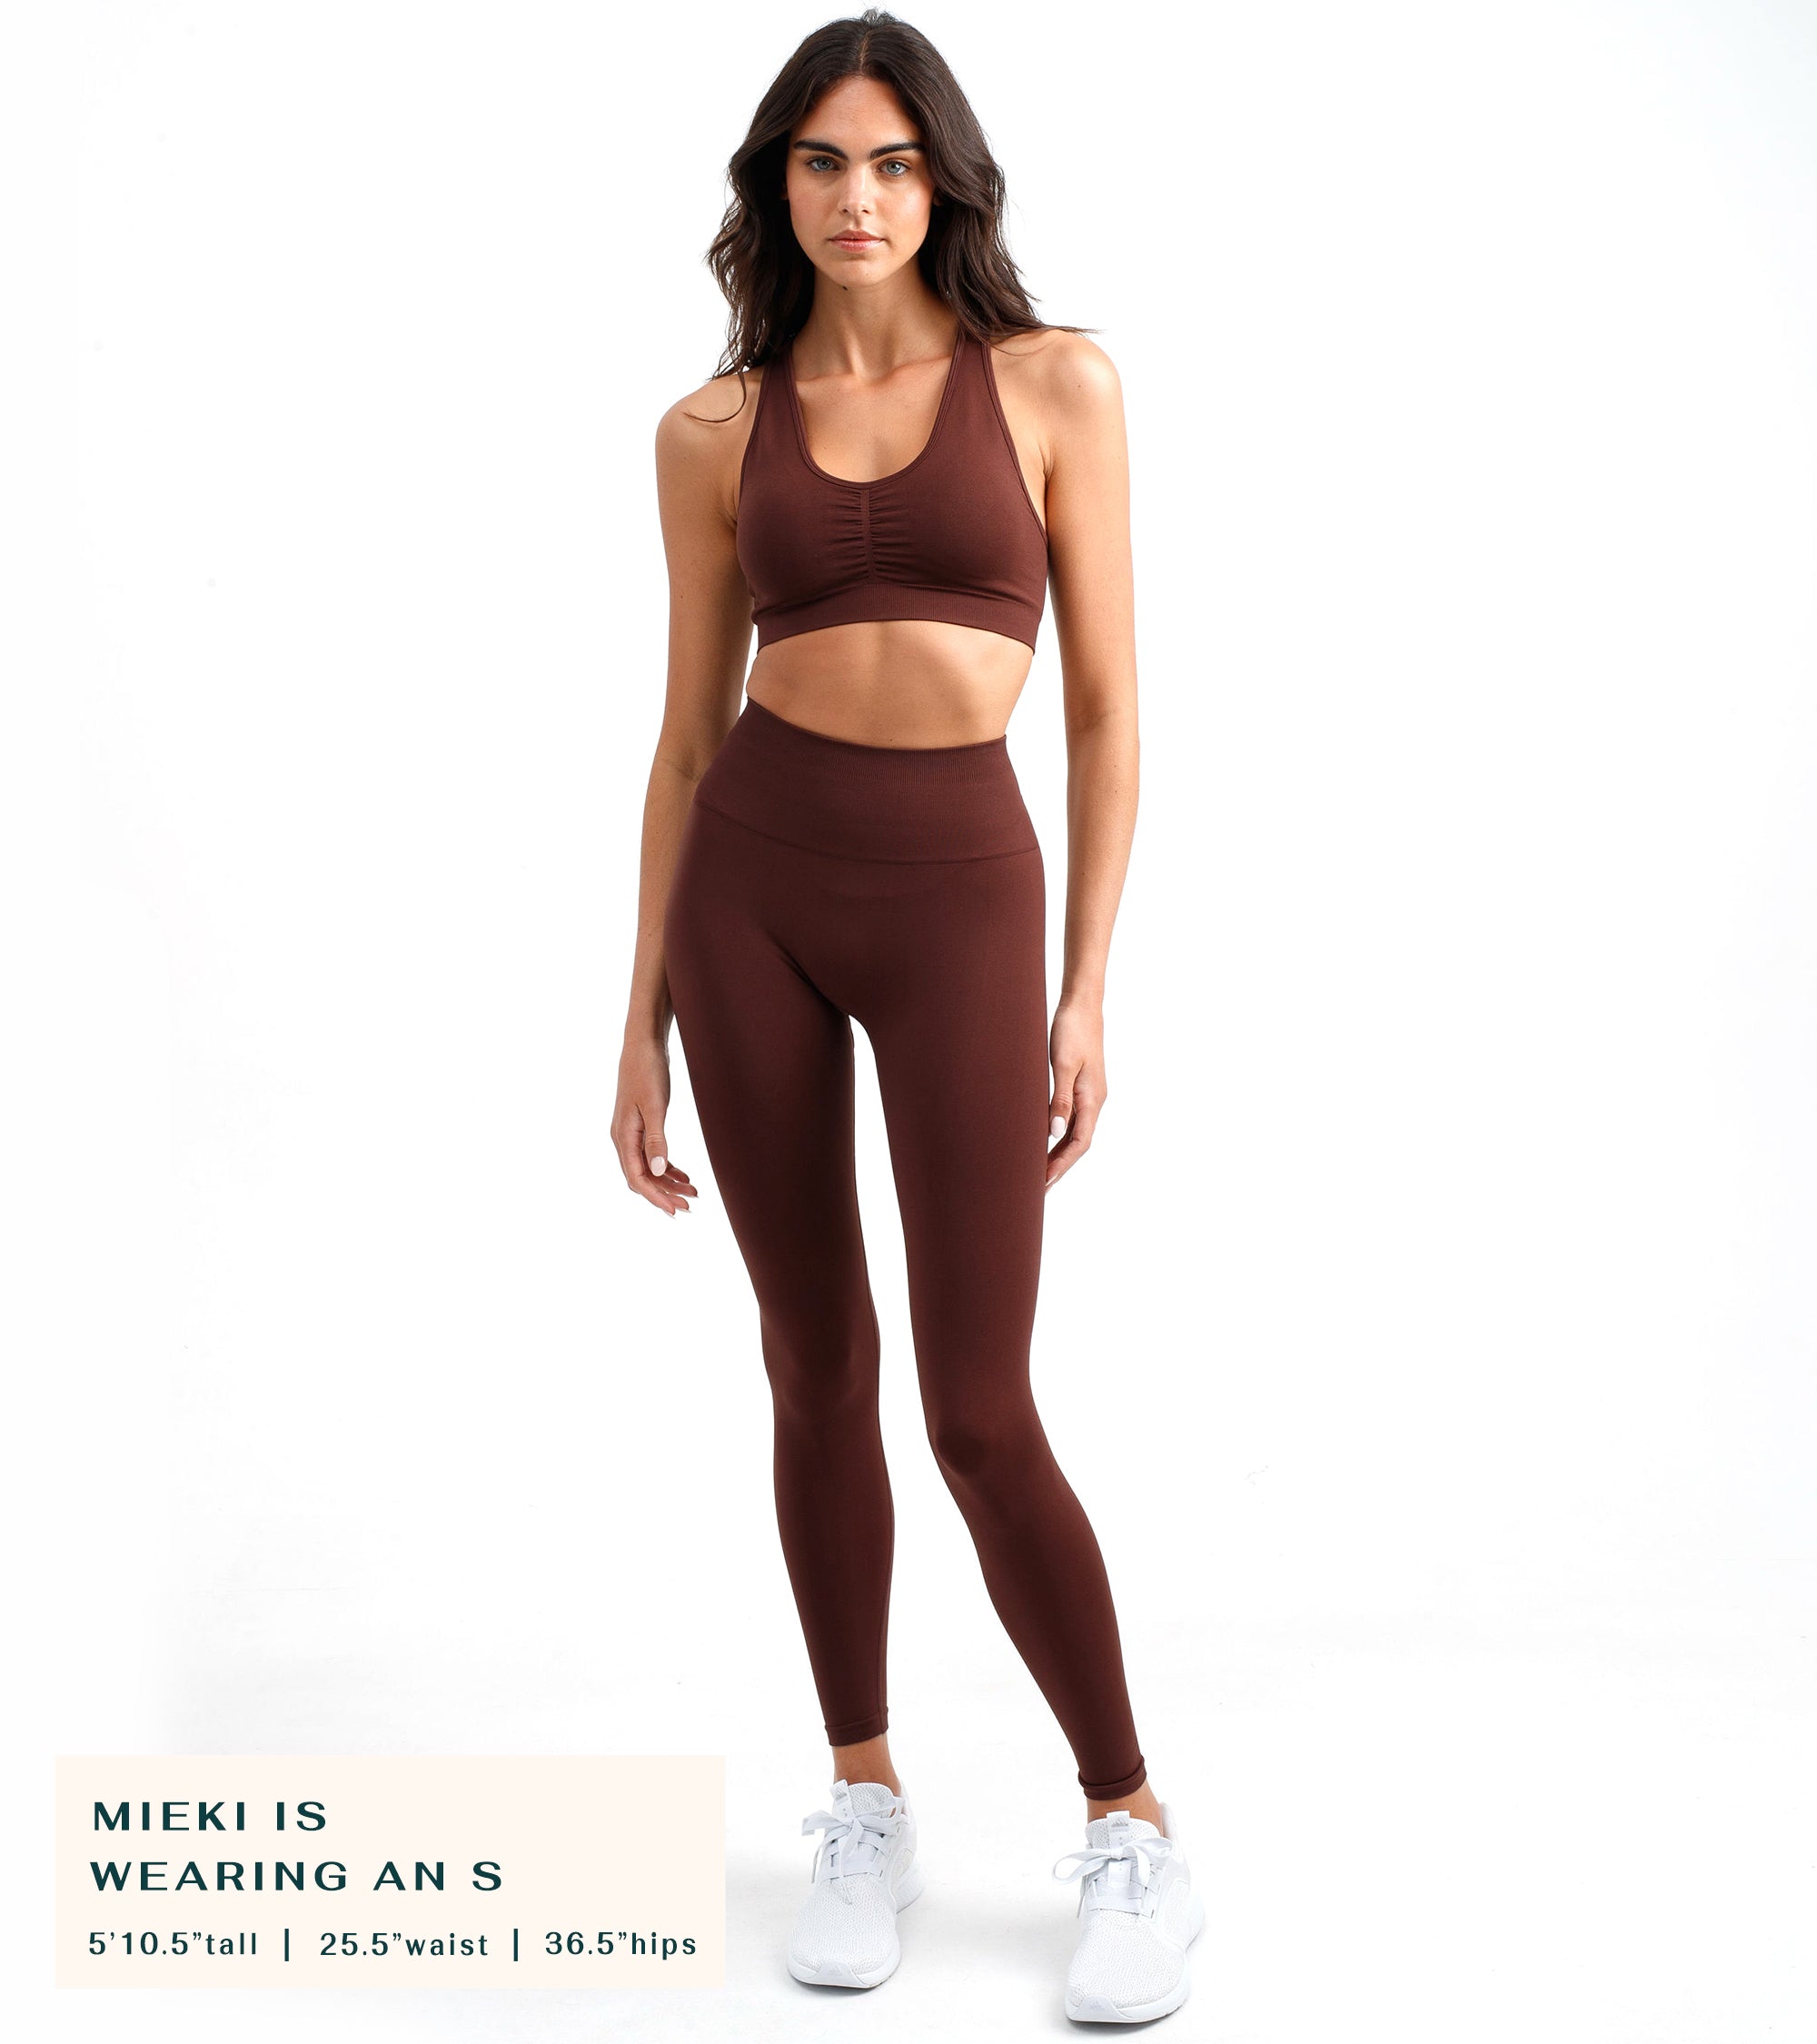 PAVOI ACTIVE Forest Green Workout Leggings for Women